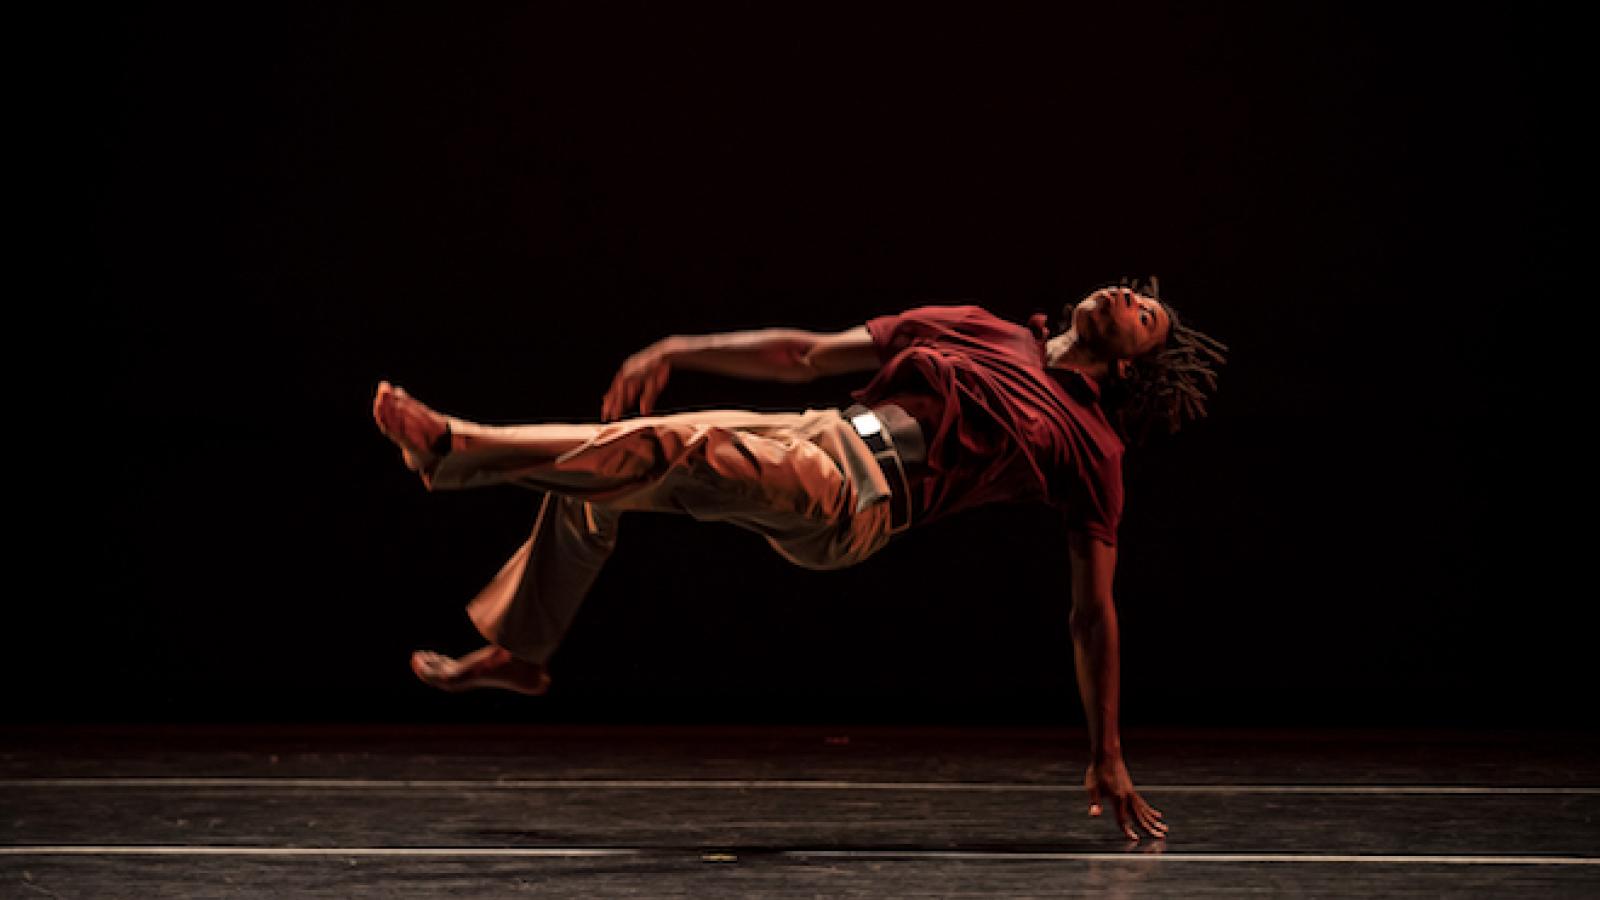 During a dance performance, Cameron McKinney, an African American man with locked hair, seems to float suspended in the air on his back, with just one hand touching the stage.